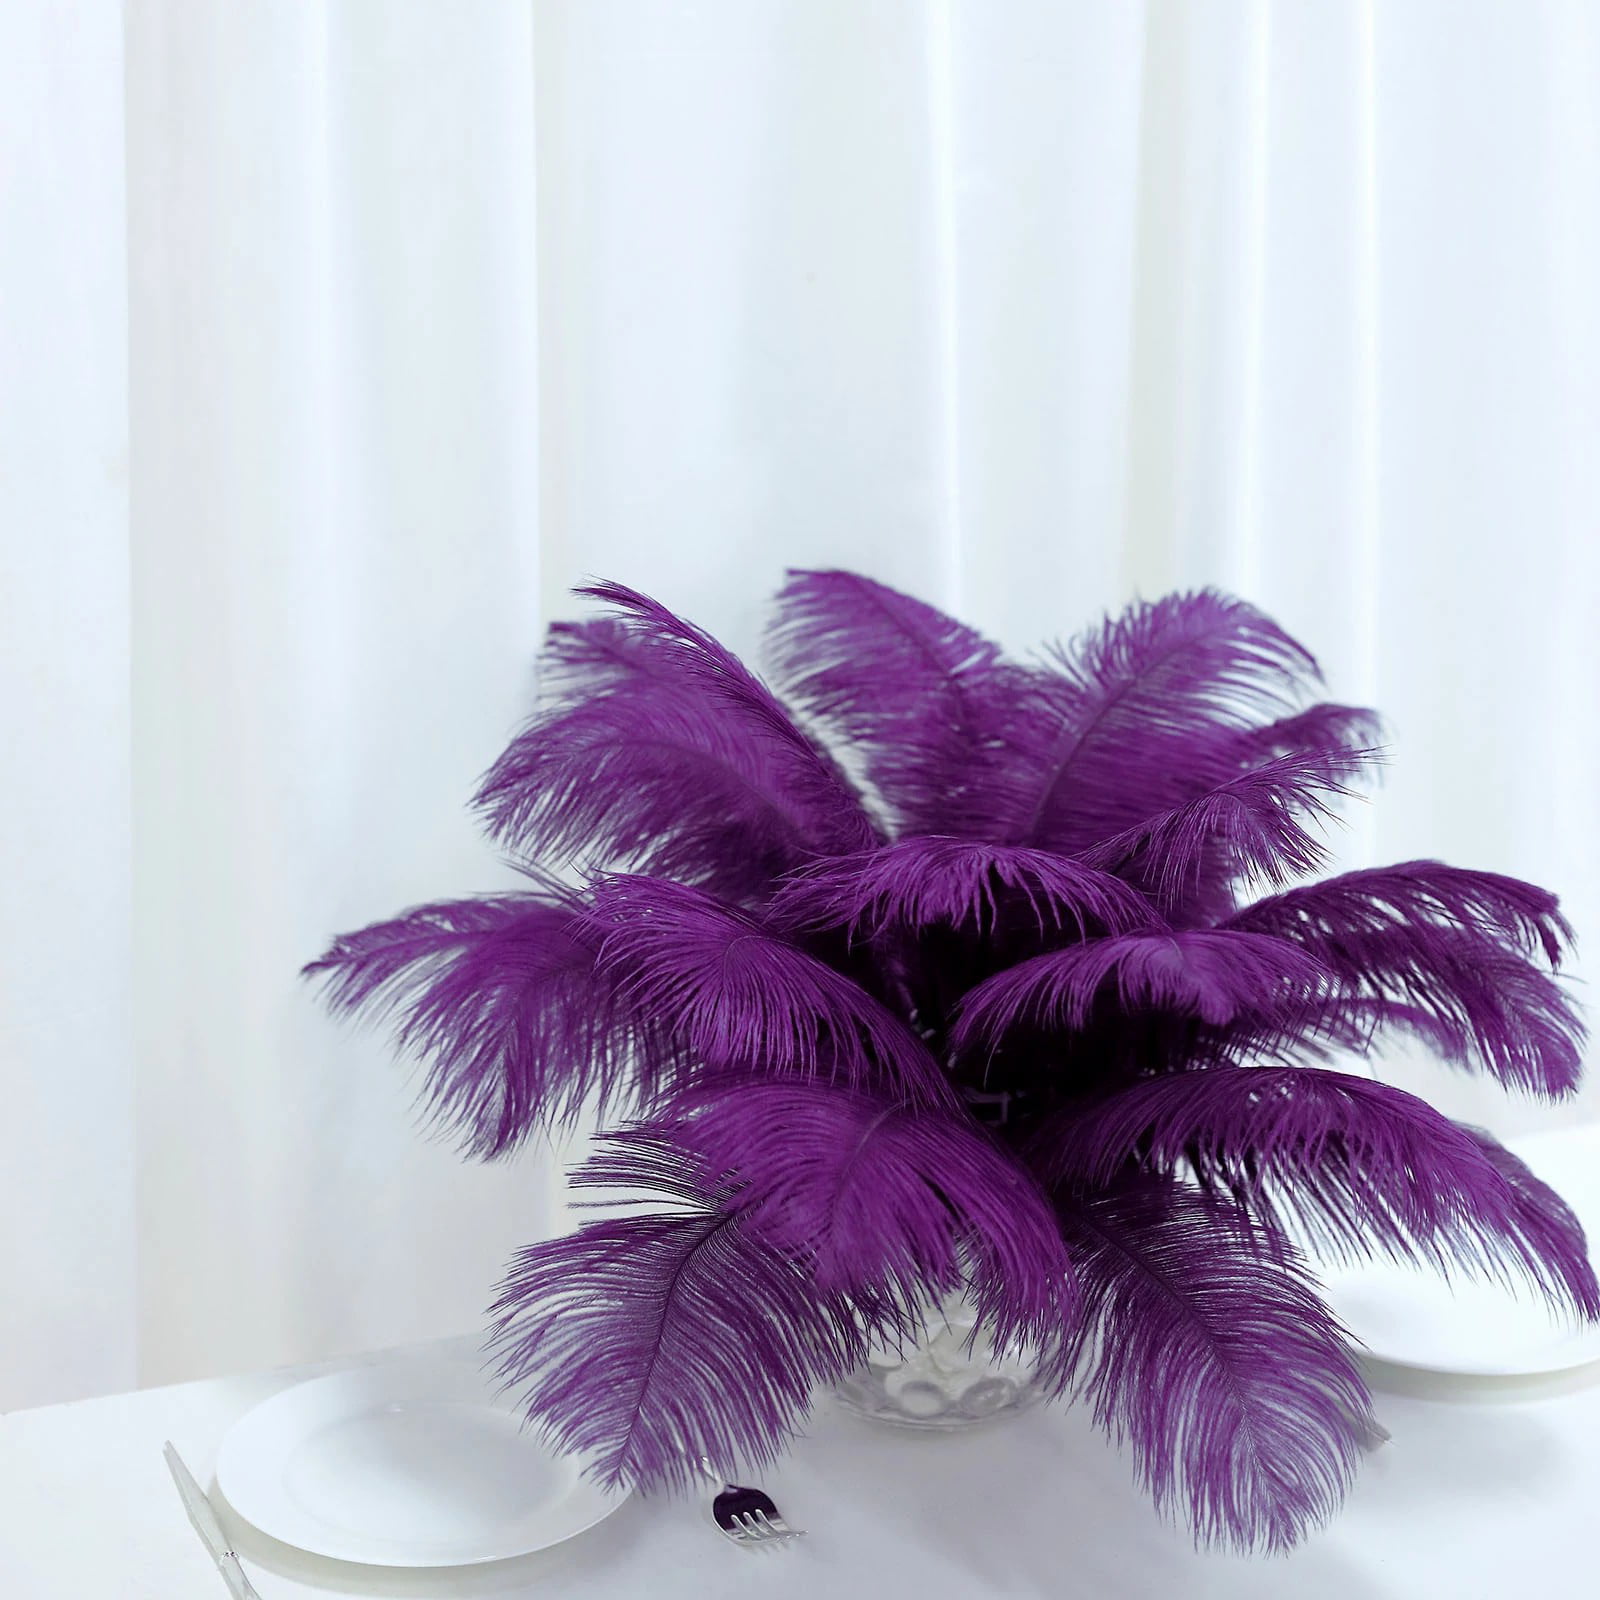 Complete Feather Centerpiece With 24 Vase (Purple) for Sale Online